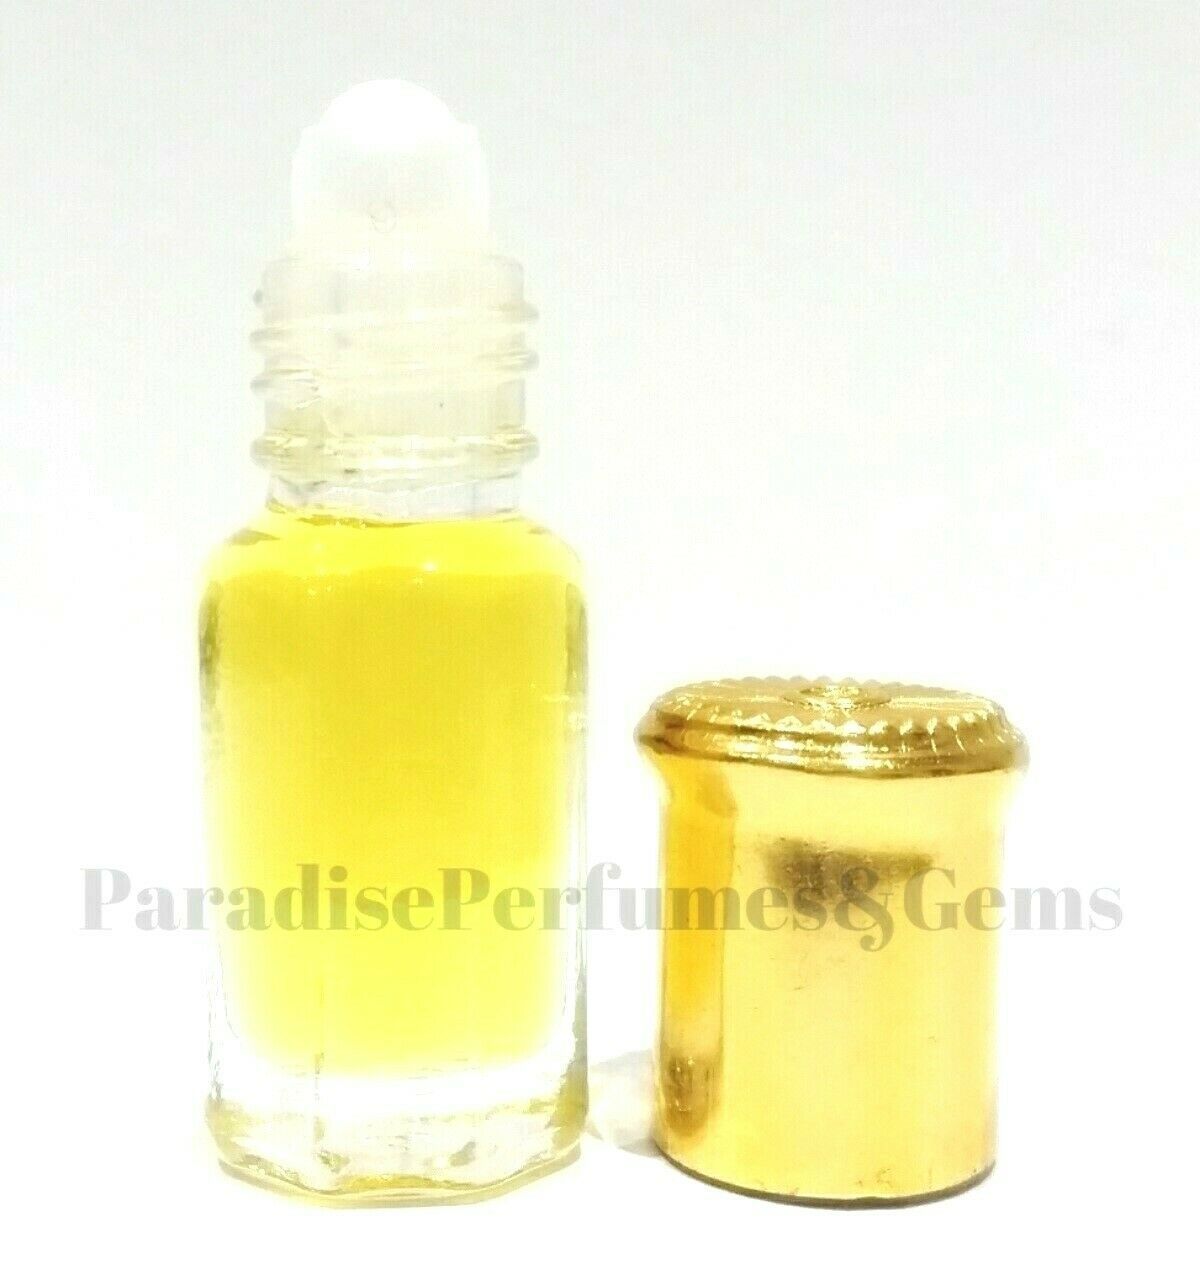 Primary image for *DEWBERRY* GORGEOUS ROLL ON FRAGRANCE PERFUME OIL 3ML - AMAZING SCENT!